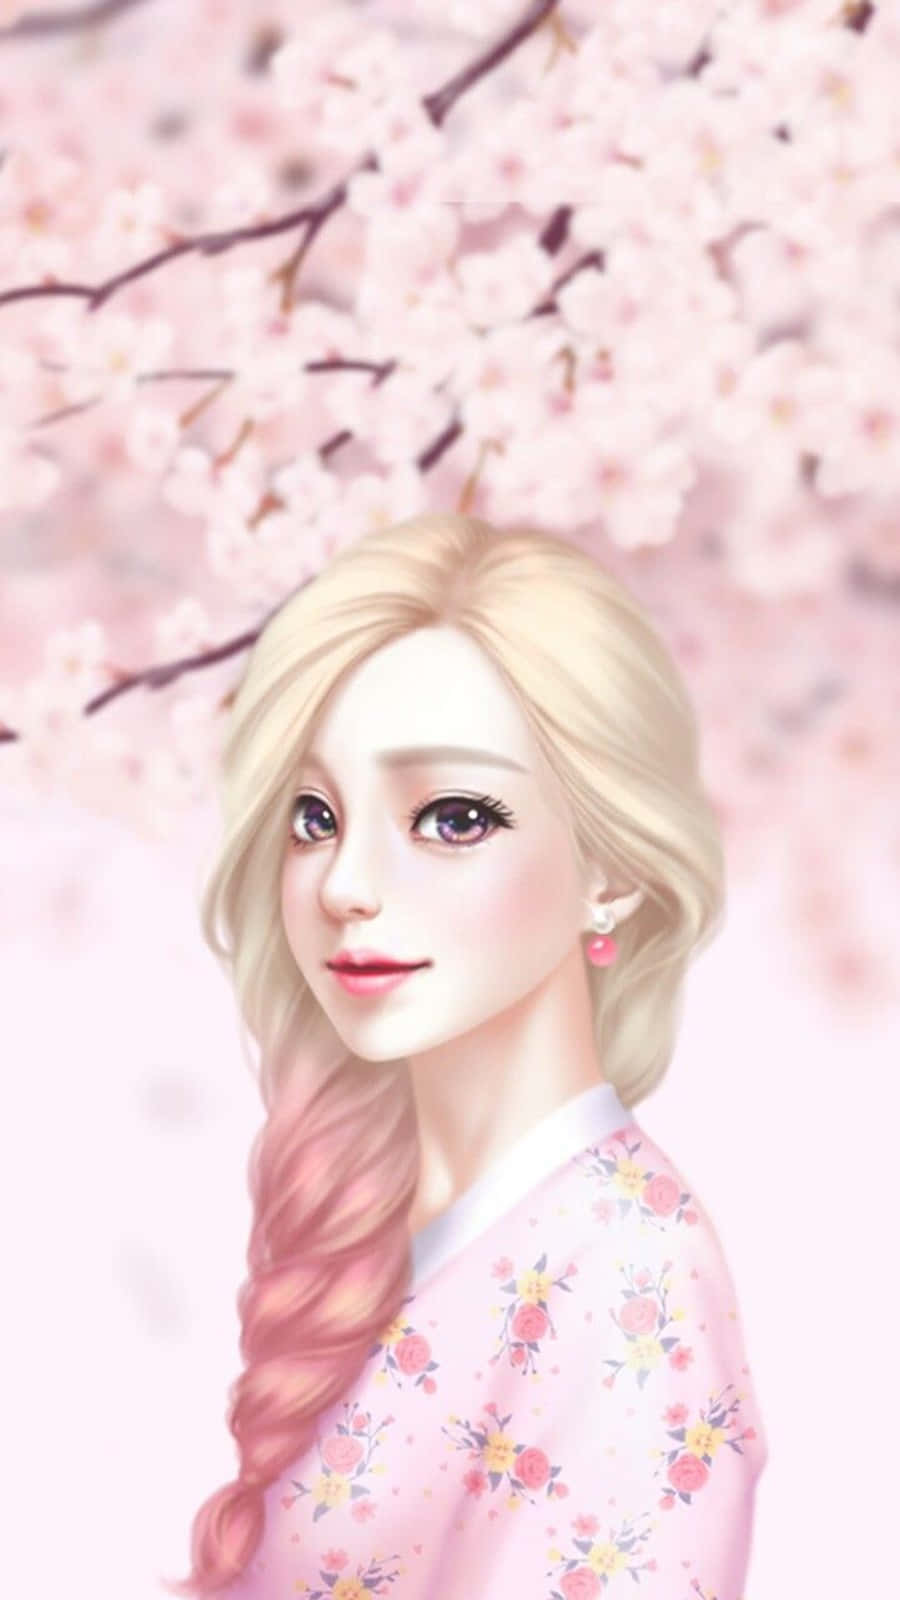 Korean Anime Girl With Pink Ombre Hair Wallpaper